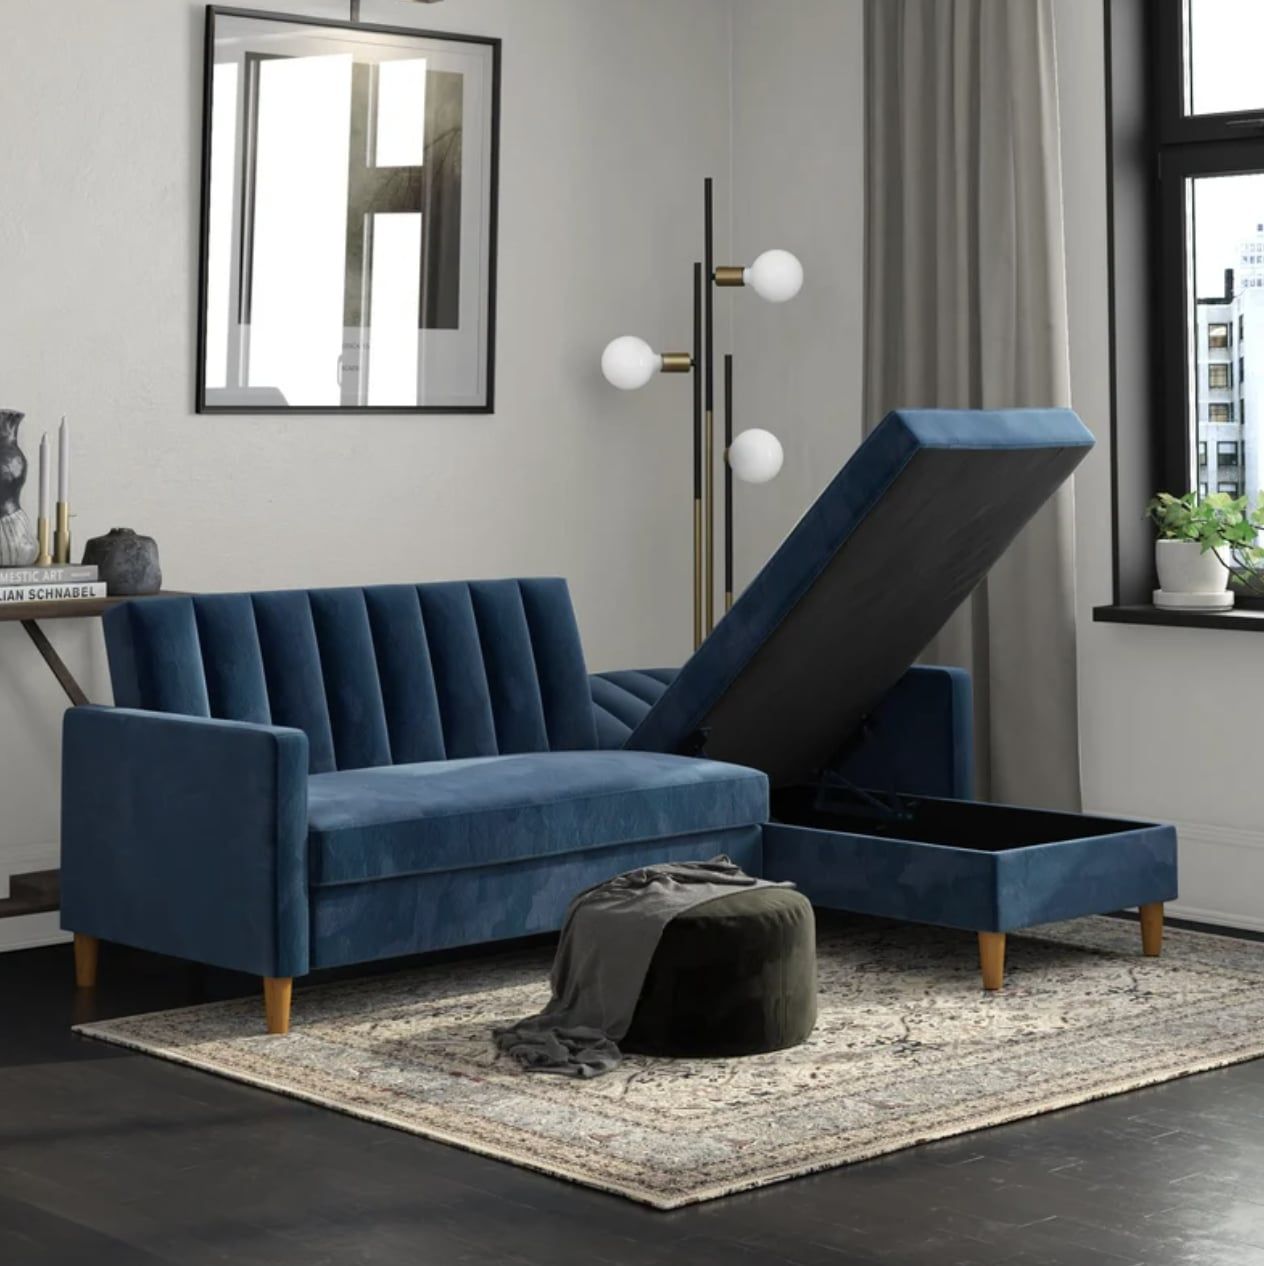 Best And Most Comfortable Sofas With Storage 2022 | Popsugar Home Inside Sectional Sofa With Storage (View 11 of 15)